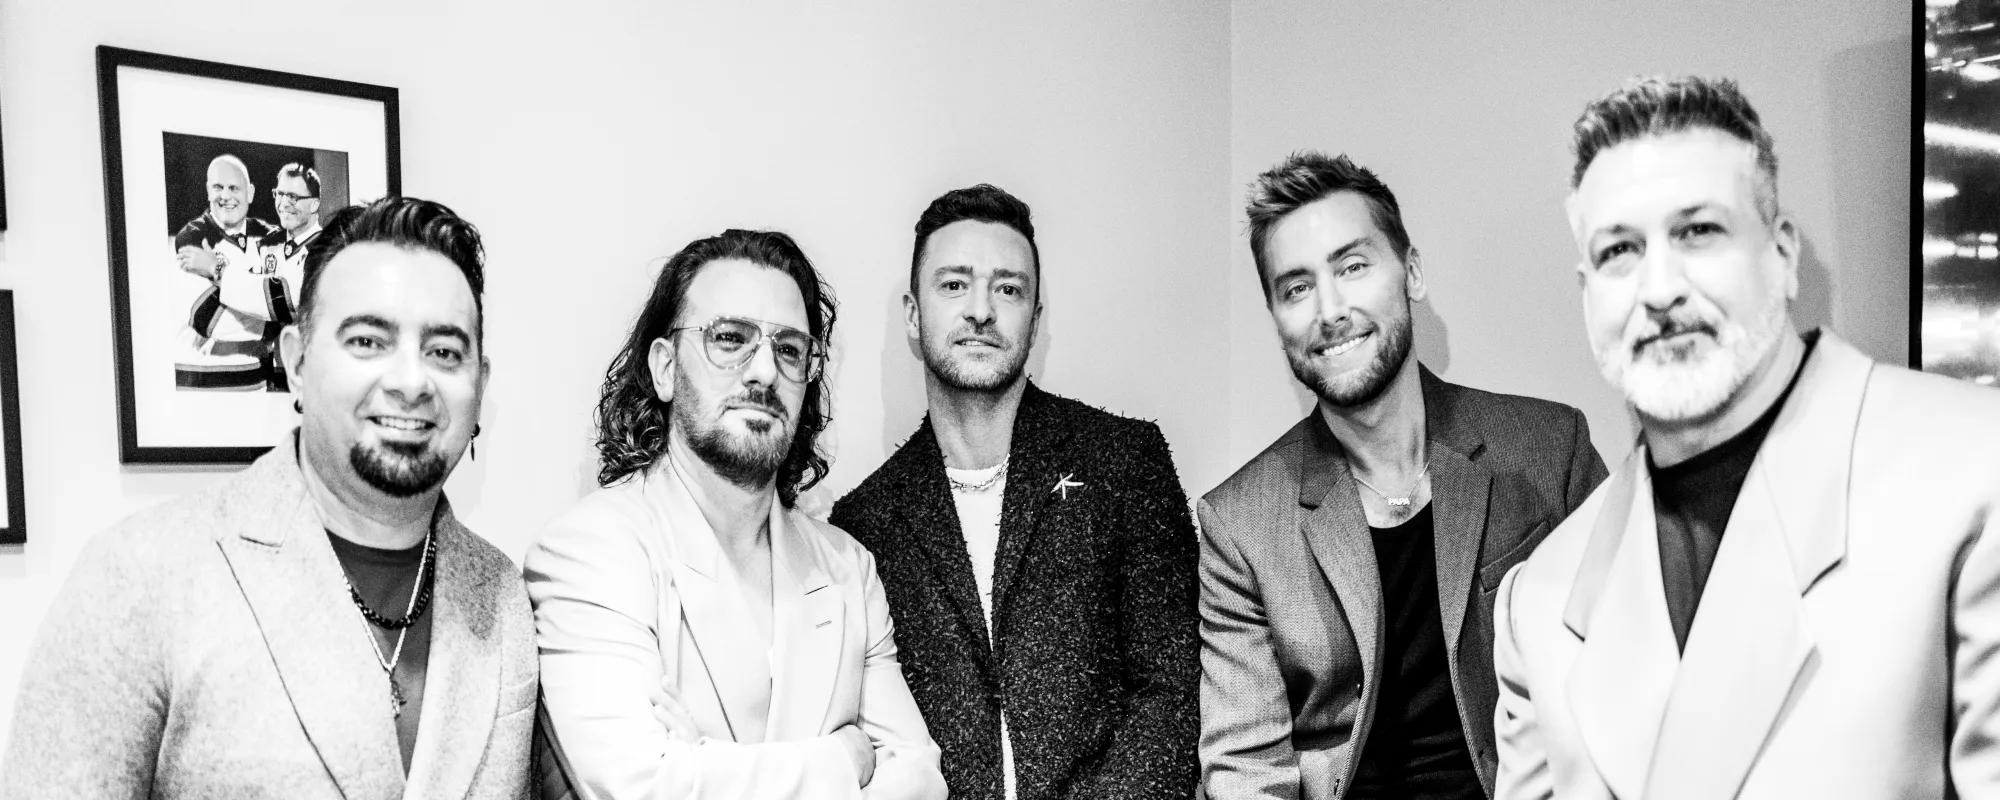 *NSYNC Recreate Old Photo in Celebration of Their Reunion